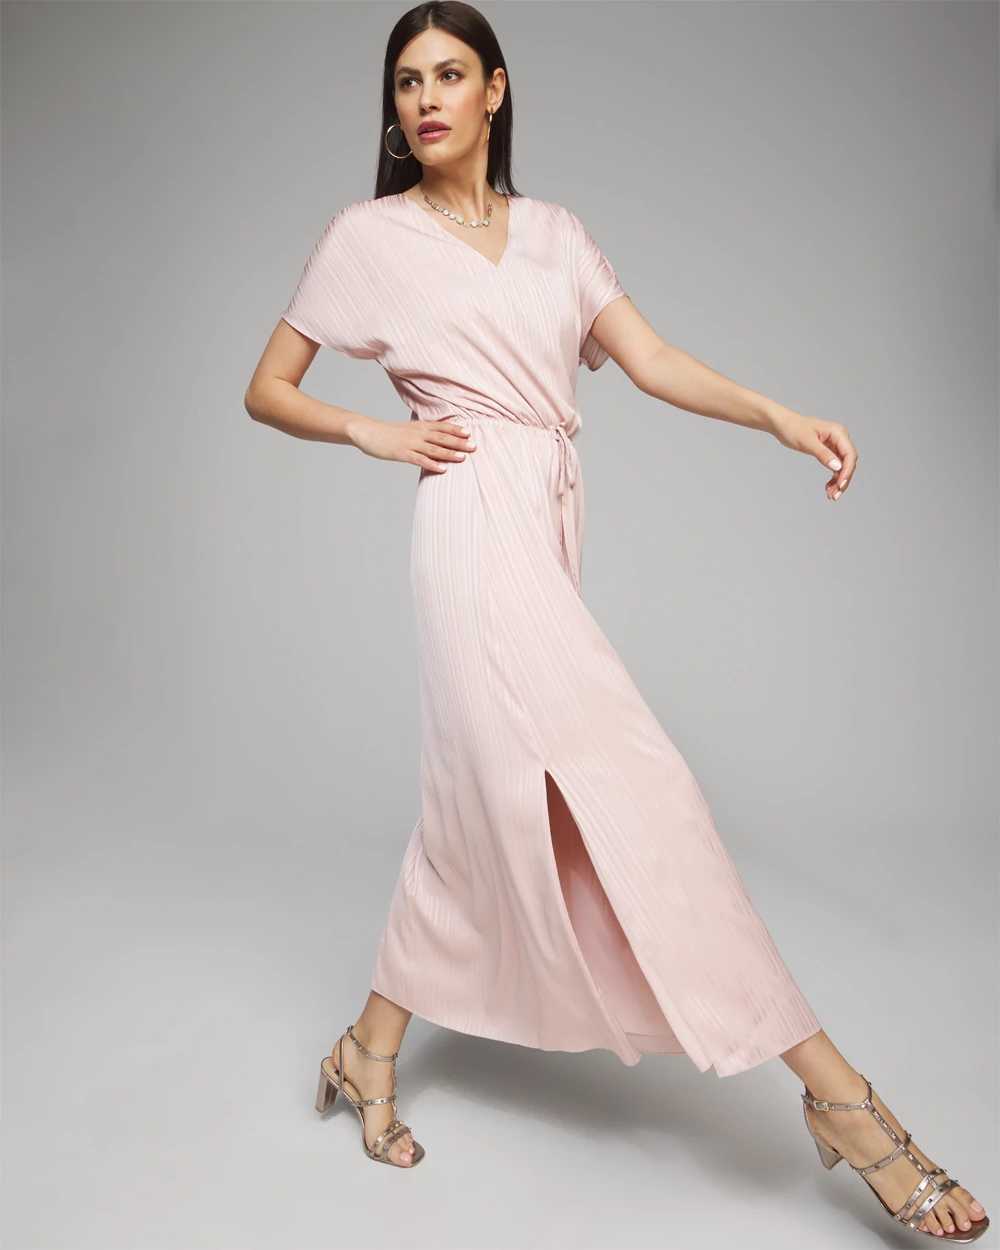 Outlet WHBM Satin Crinkle Maxi Dress click to view larger image.